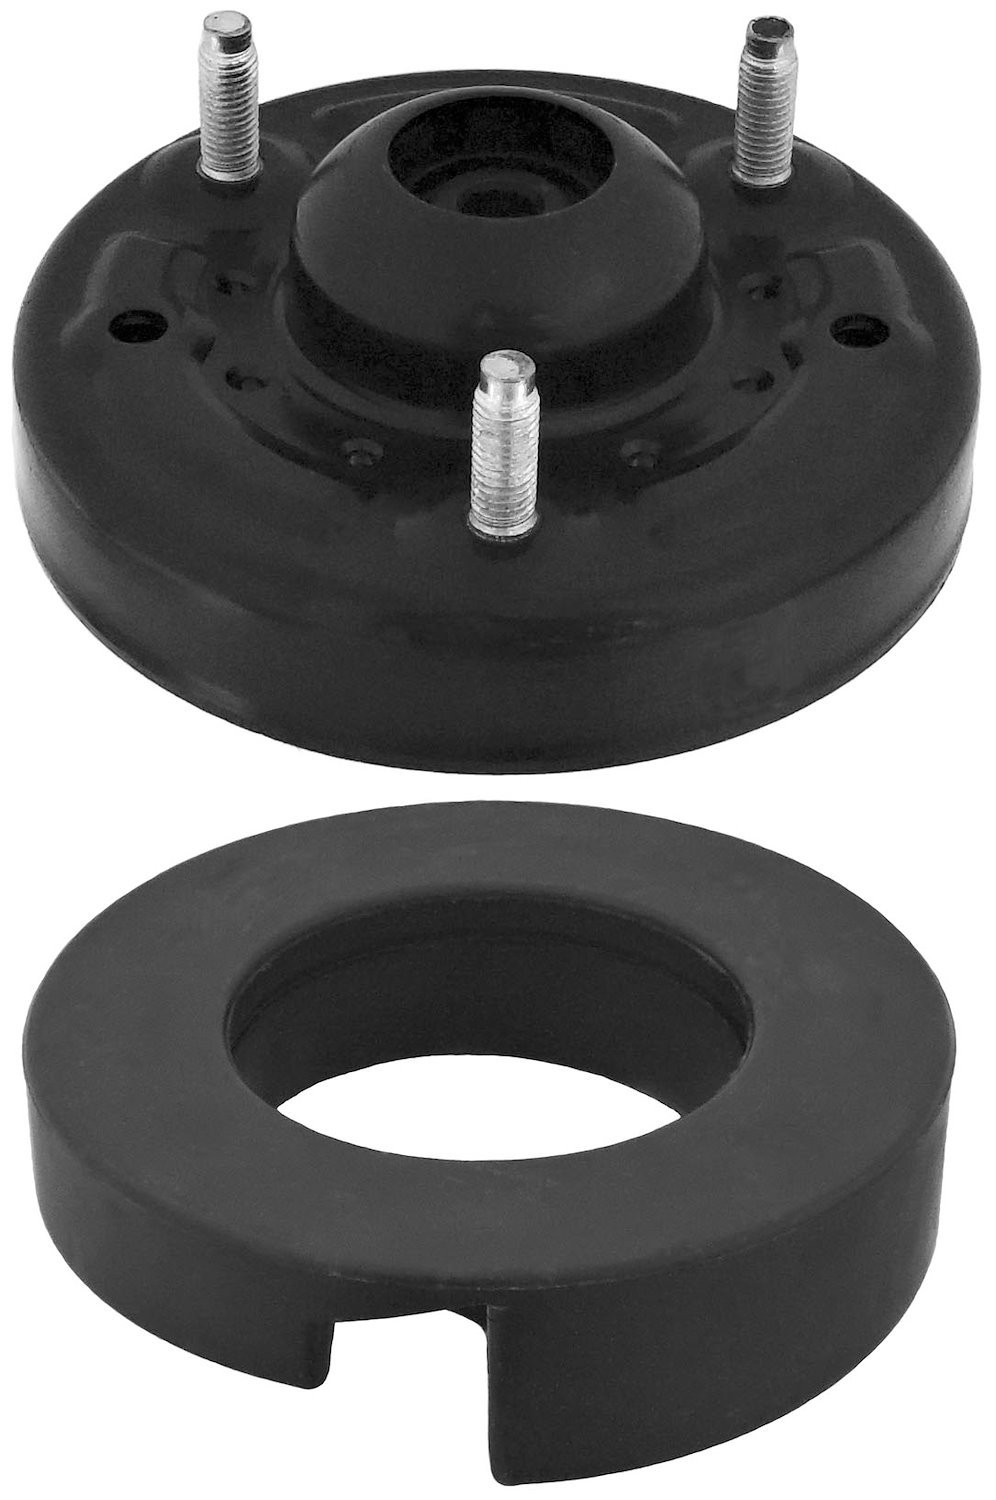 Strut Mount Kit for 2007-2014 Ford Expedition, 2009-2019 Ford F-150, 2007-2014 Lincoln Navigator